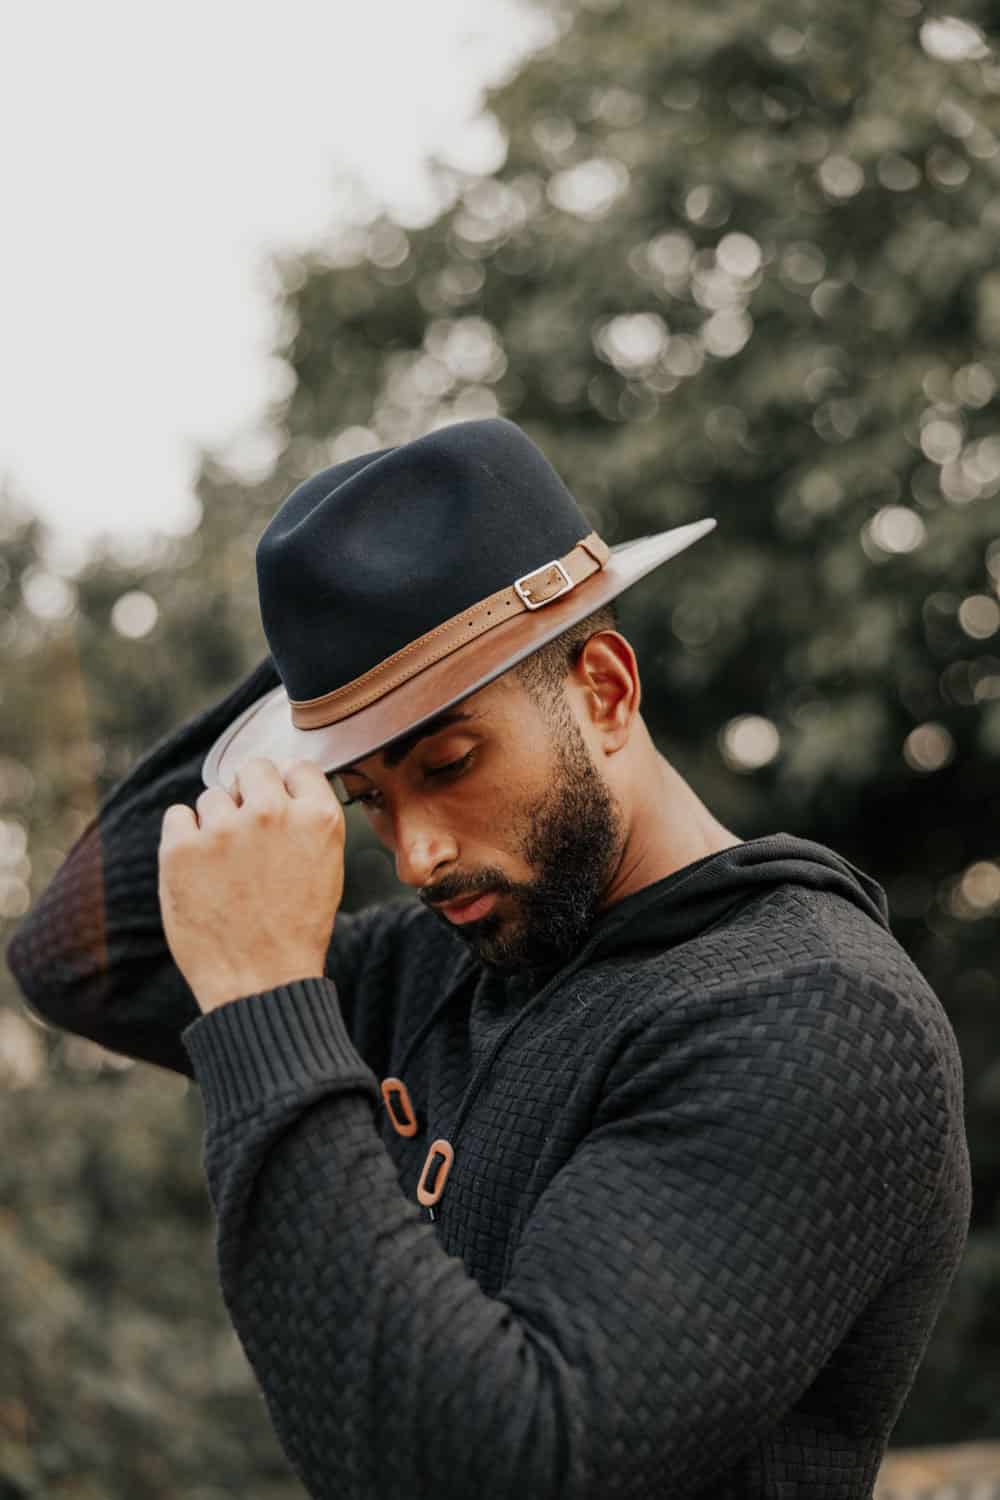 Men's Statement Hats That Will Work With Your Style - Spectacular